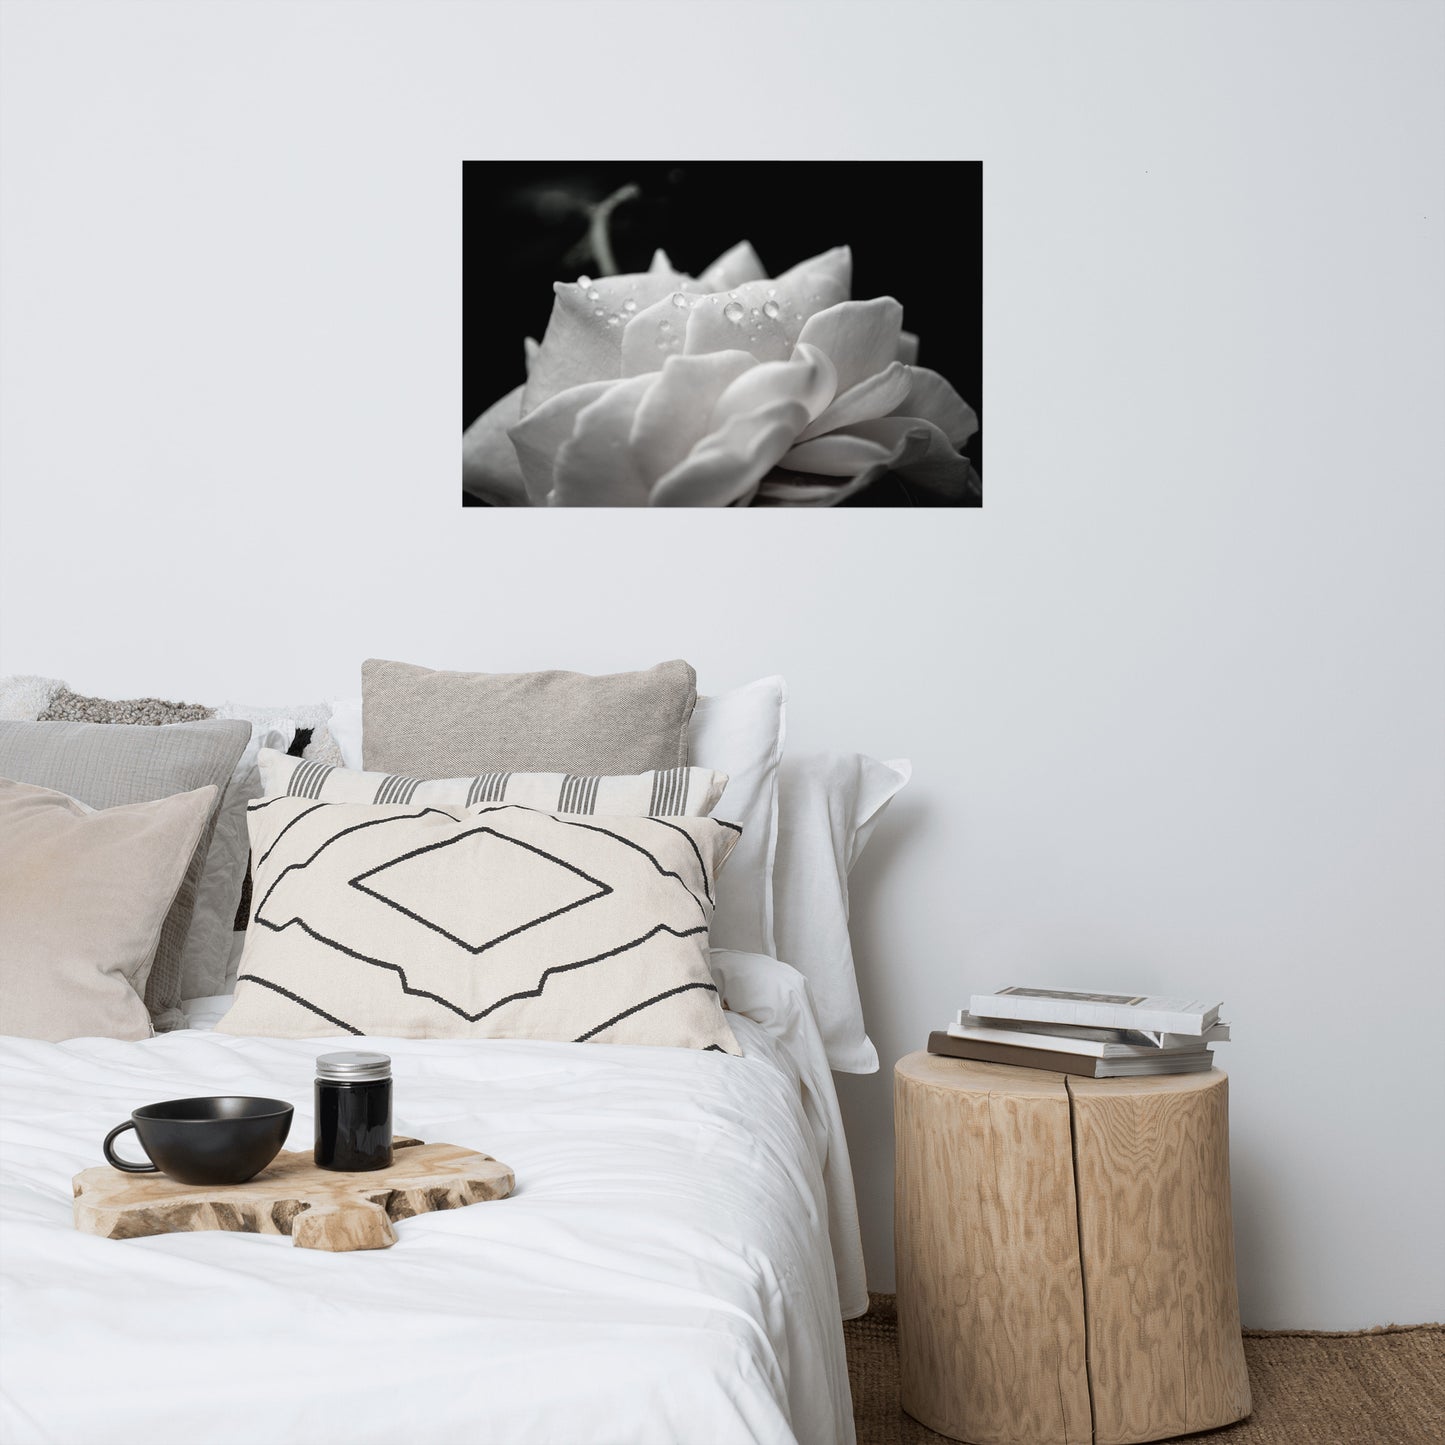 Delicate Rose Black and White Floral Nature Photo Loose Unframed Wall Art Prints